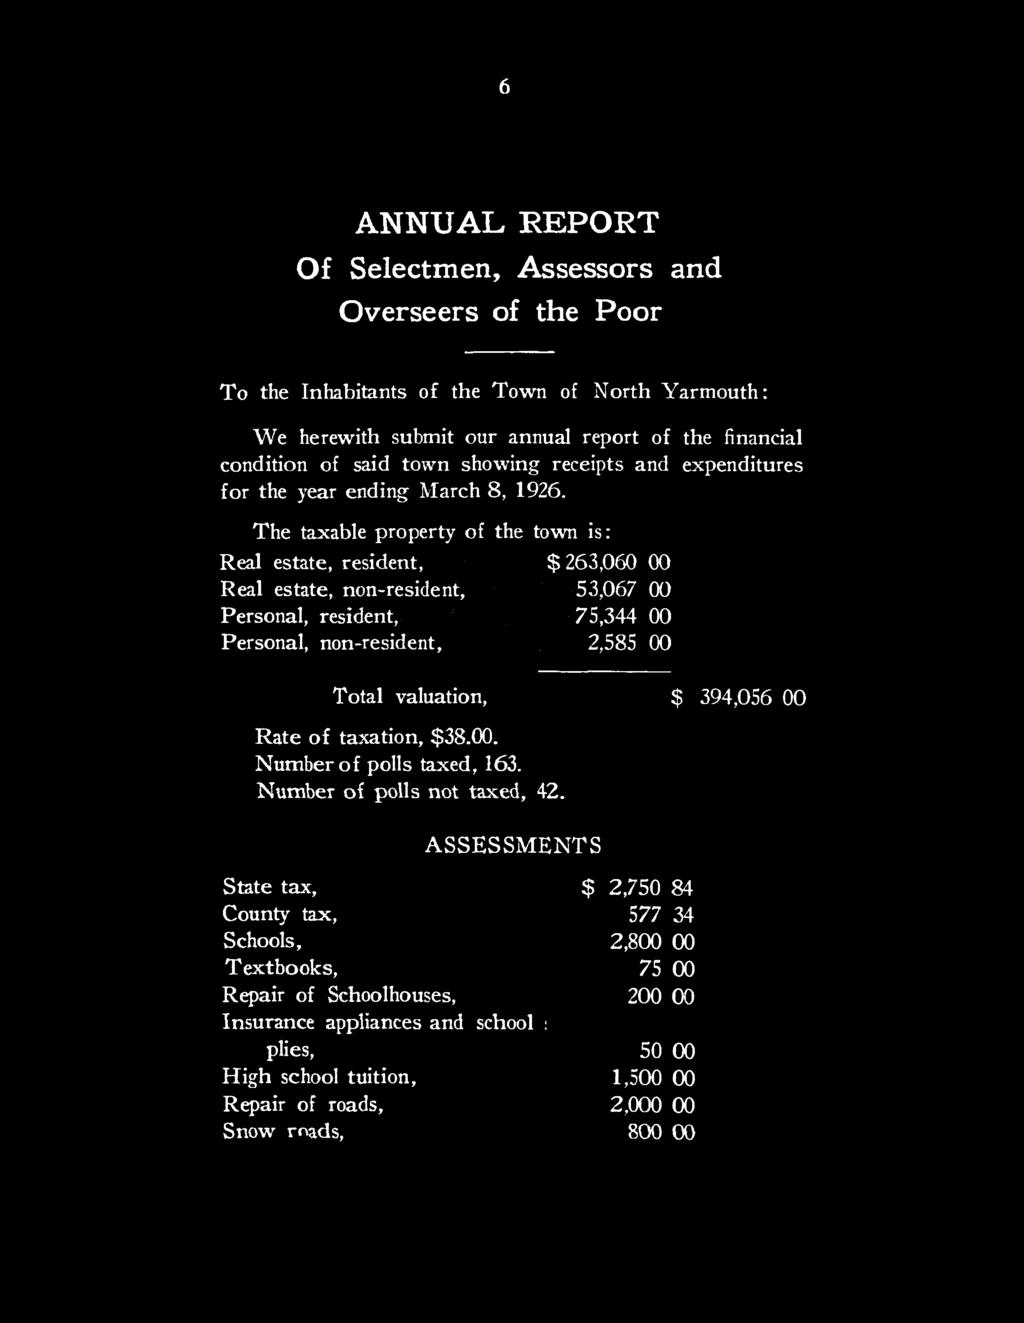 6 ANNUAL REPORT Of Selectmen, Assessors and Overseers of the Poor To the Inhabitants of the Town of North Yarmouth: We herewith submit our annual report of the financial condition of said town